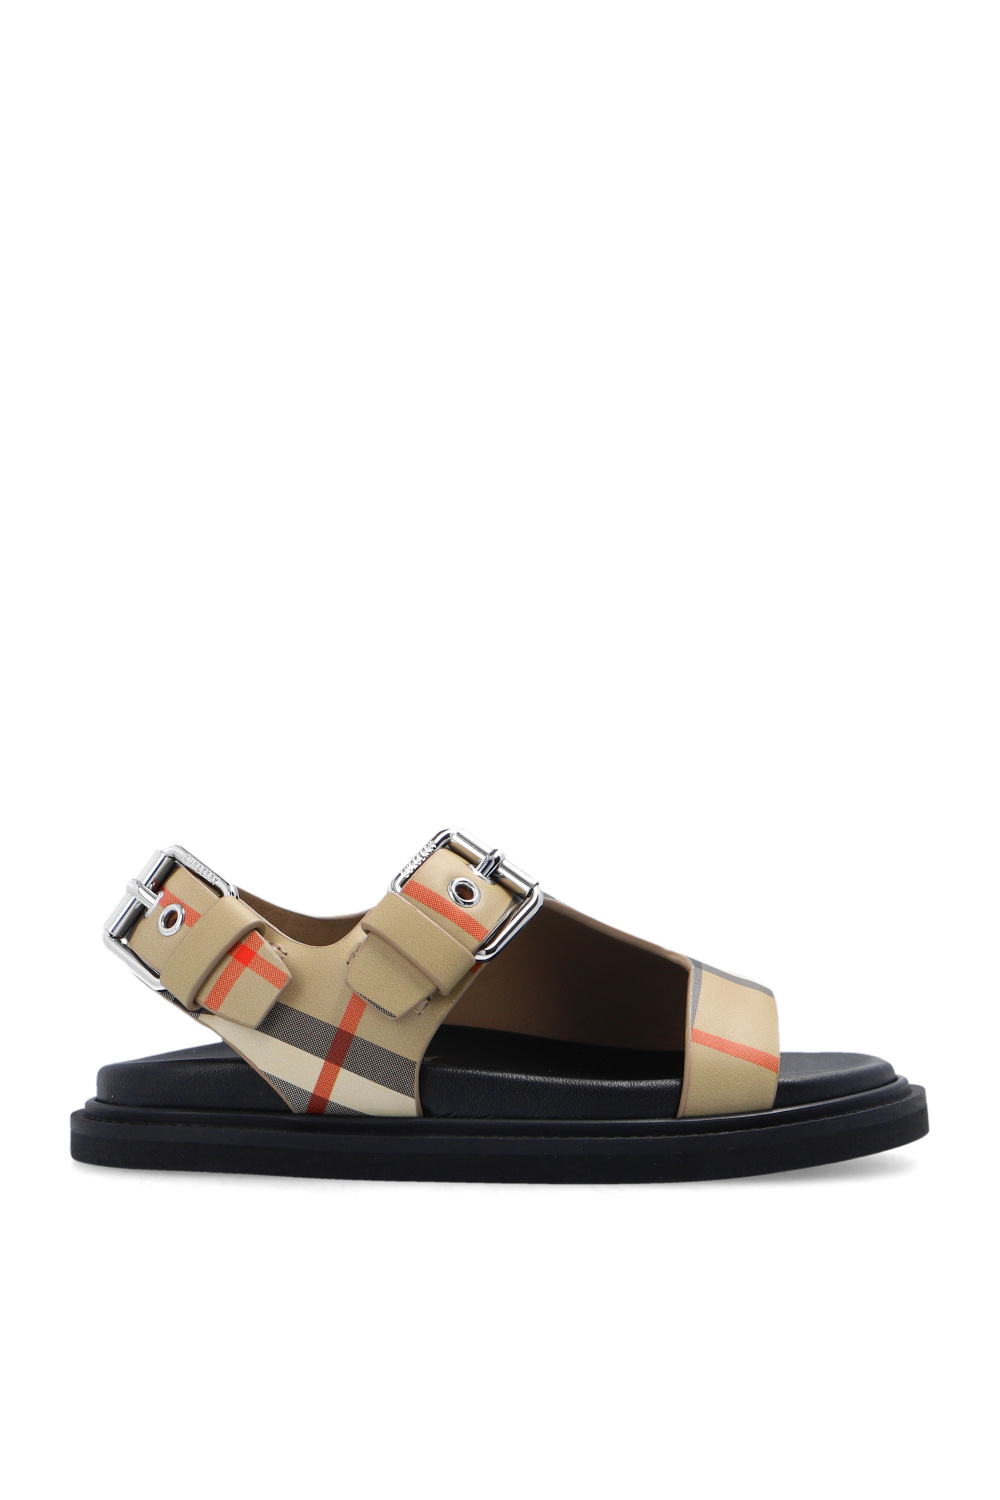 burberry pattern Kids Checked sandals